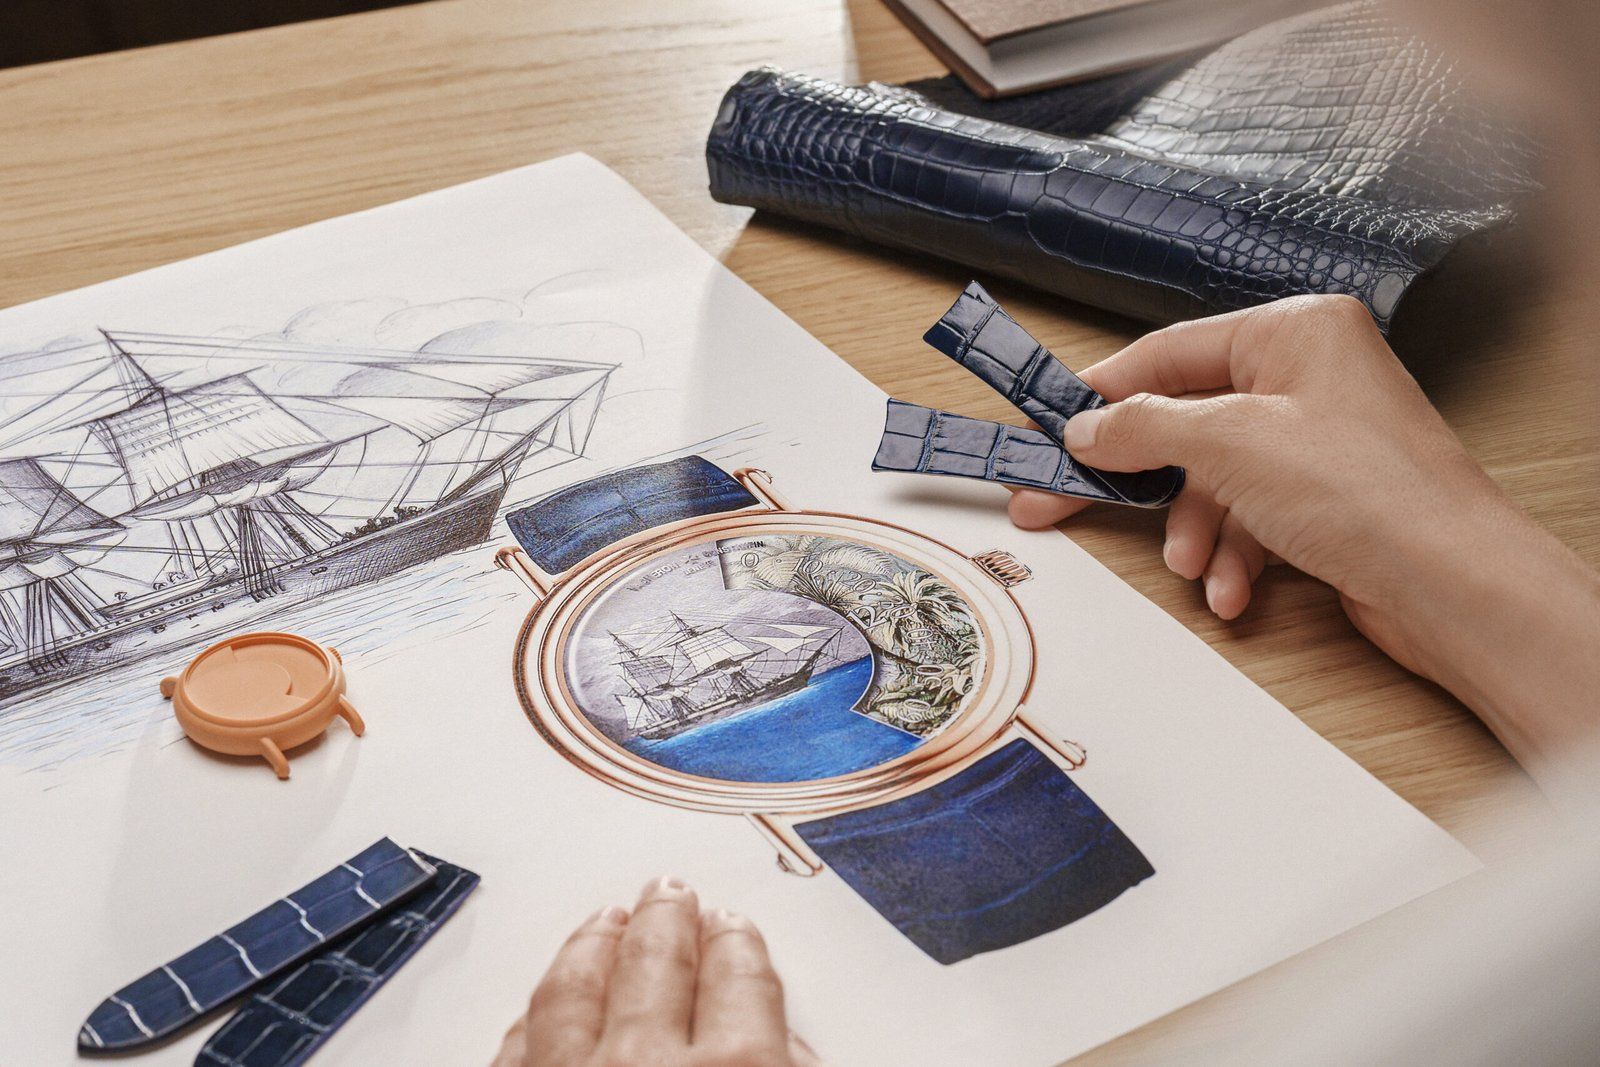 The latest Métiers d'Art Tribute to Explorer Naturalists collection commemorates the historic voyage of the Beagle